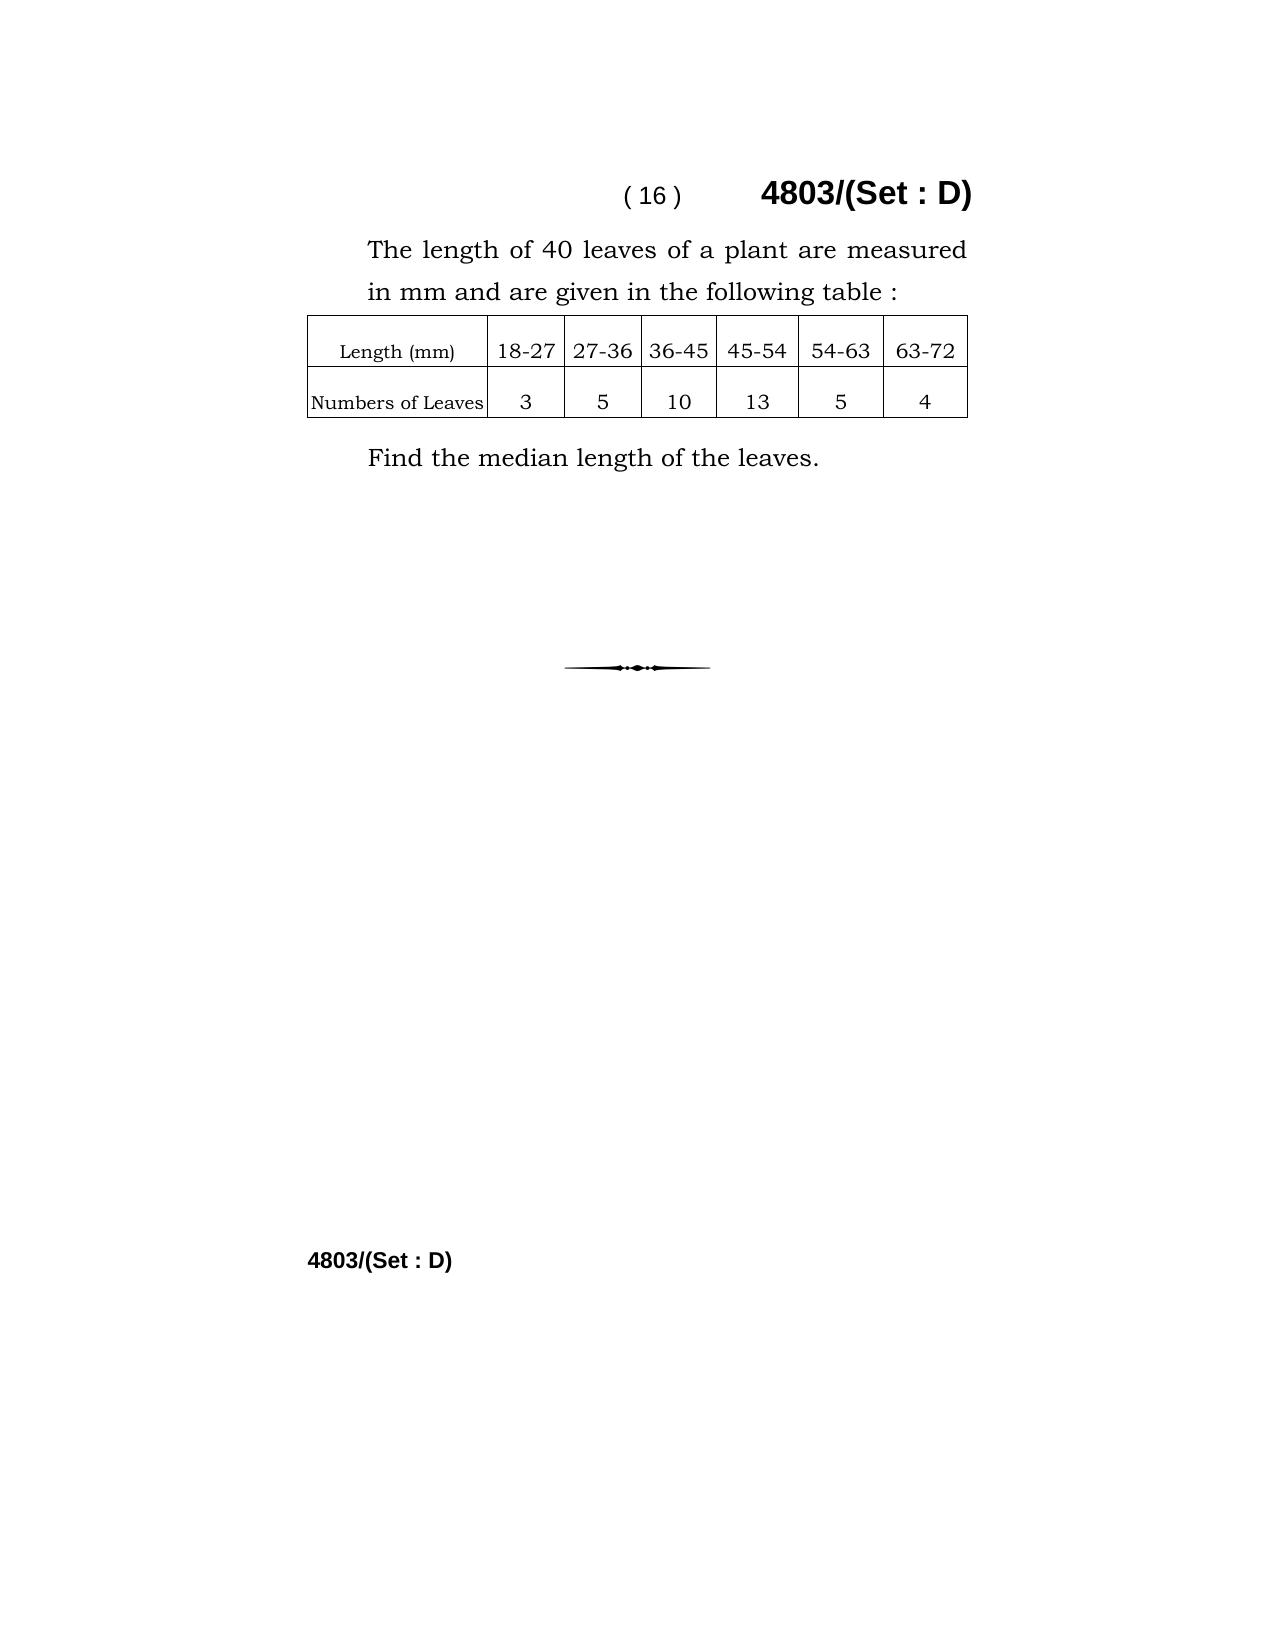 Haryana Board HBSE Class 10 Mathematics 2020 Question Paper - Page 64